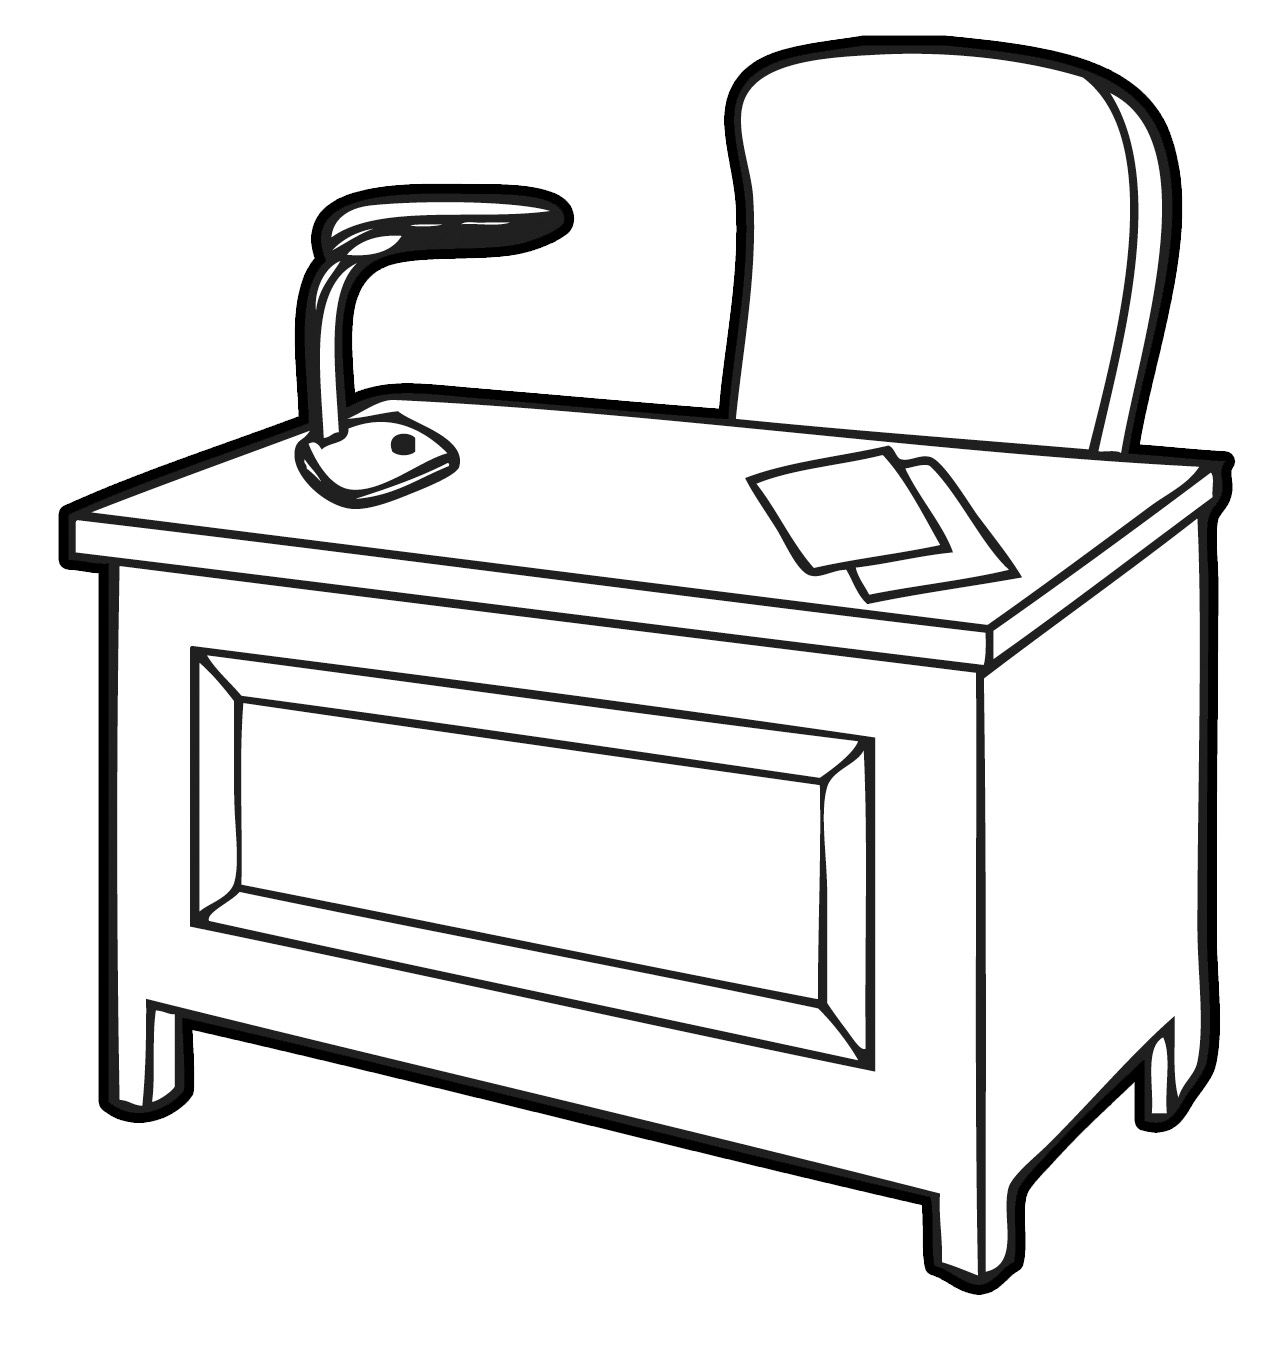 office clipart royalty free - photo #40